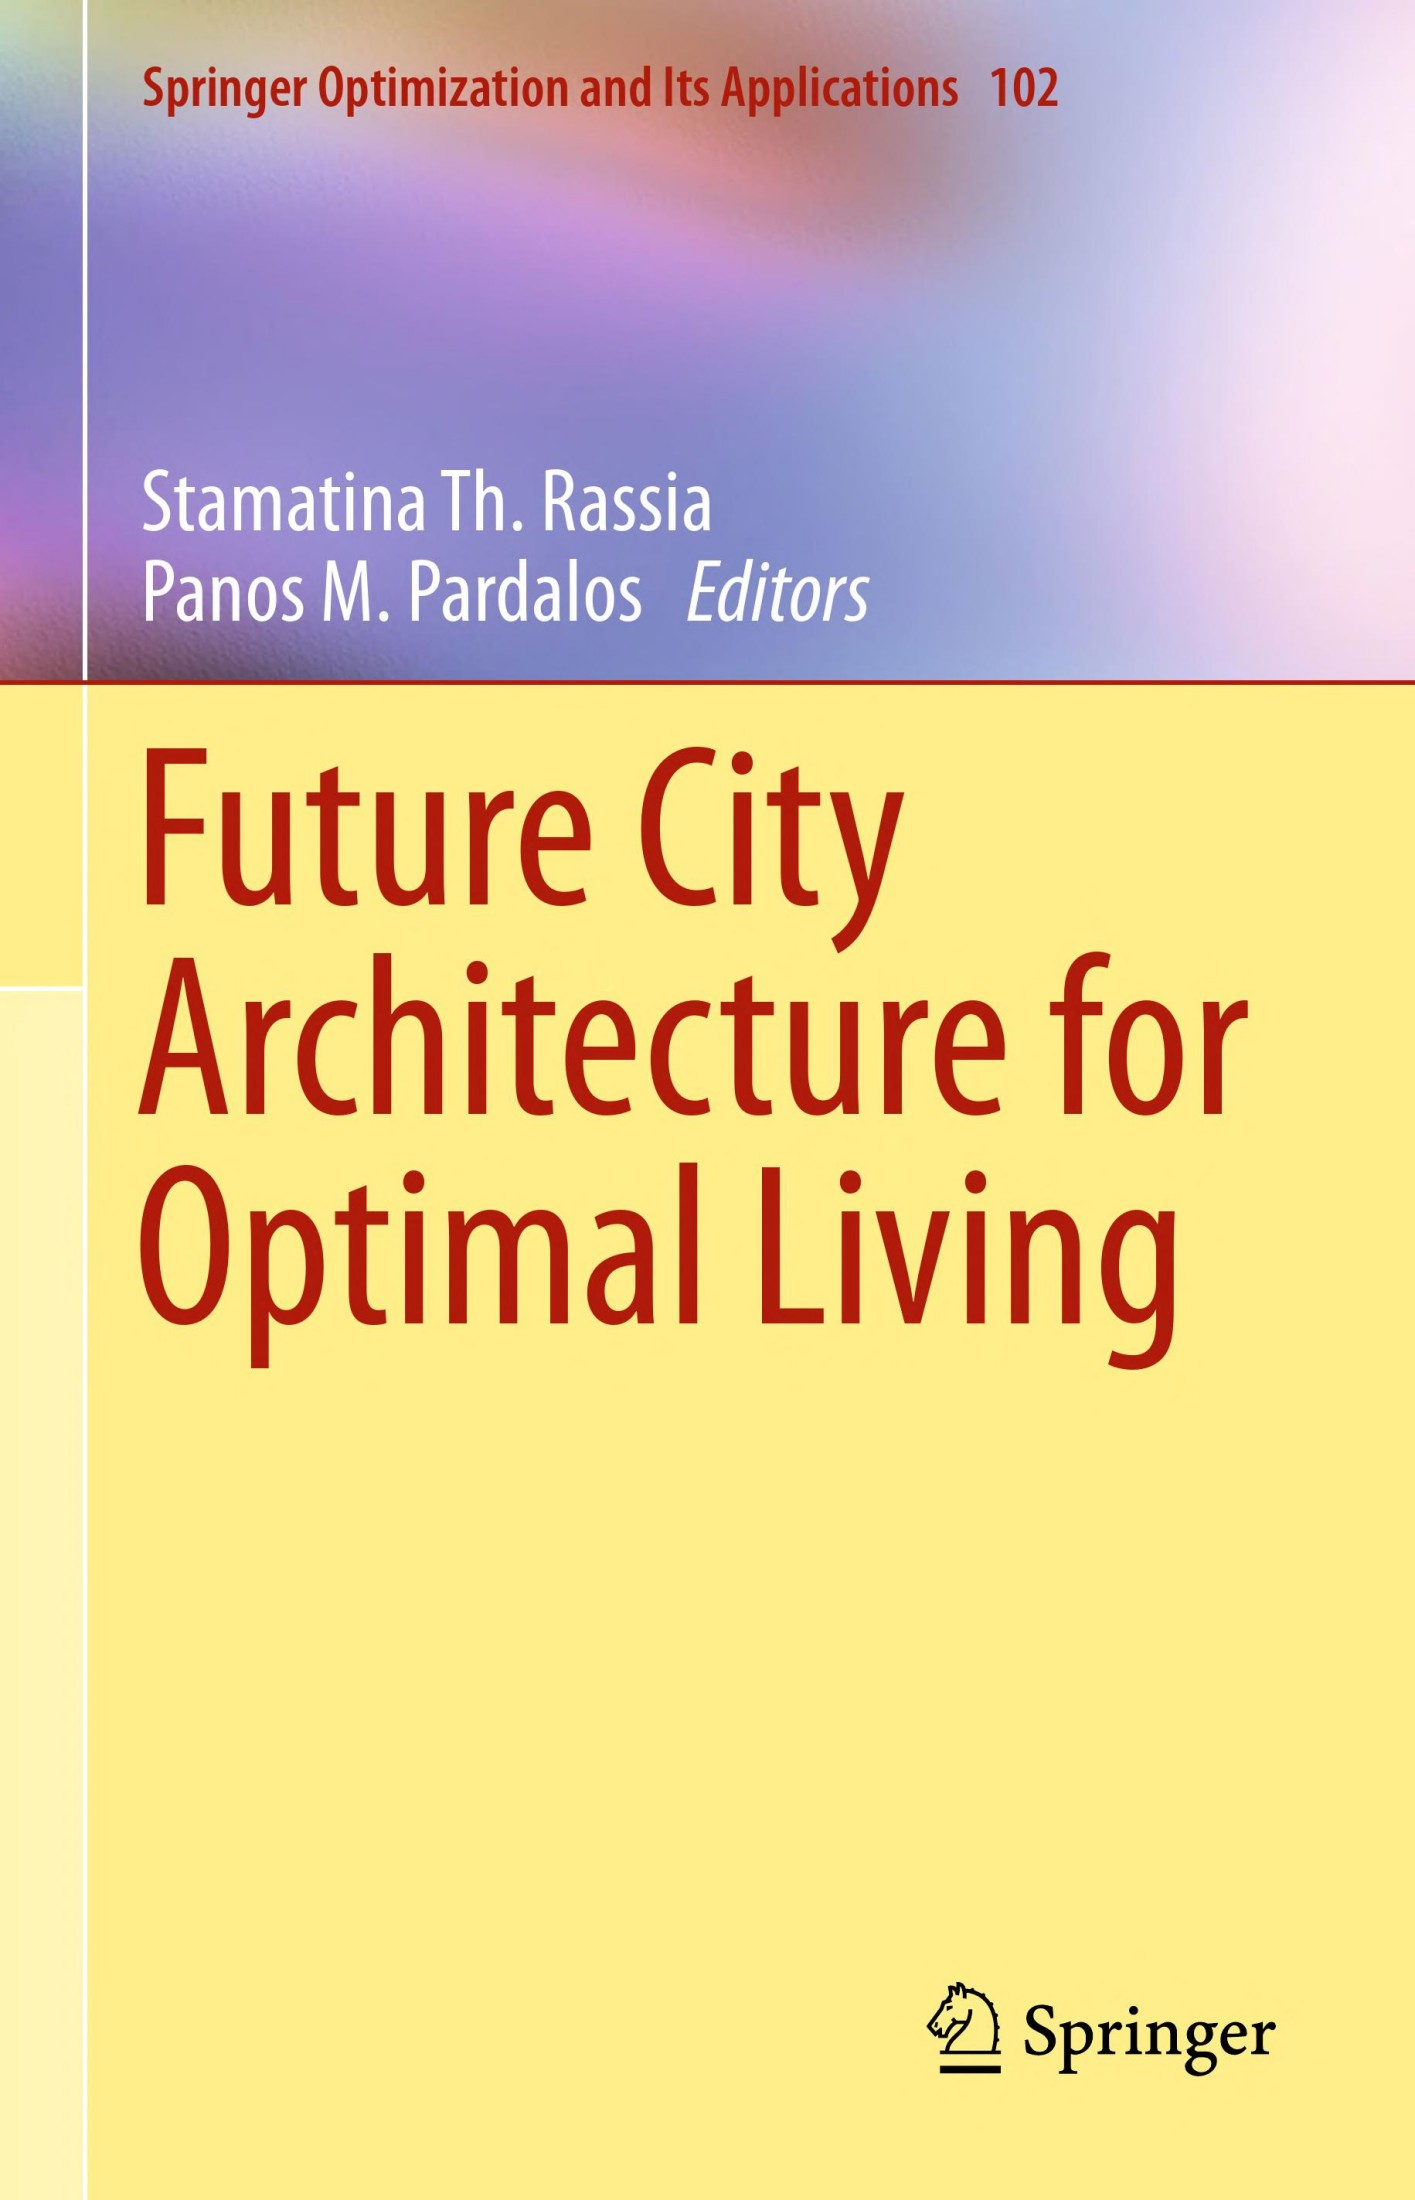 Future city architecture for optimal living